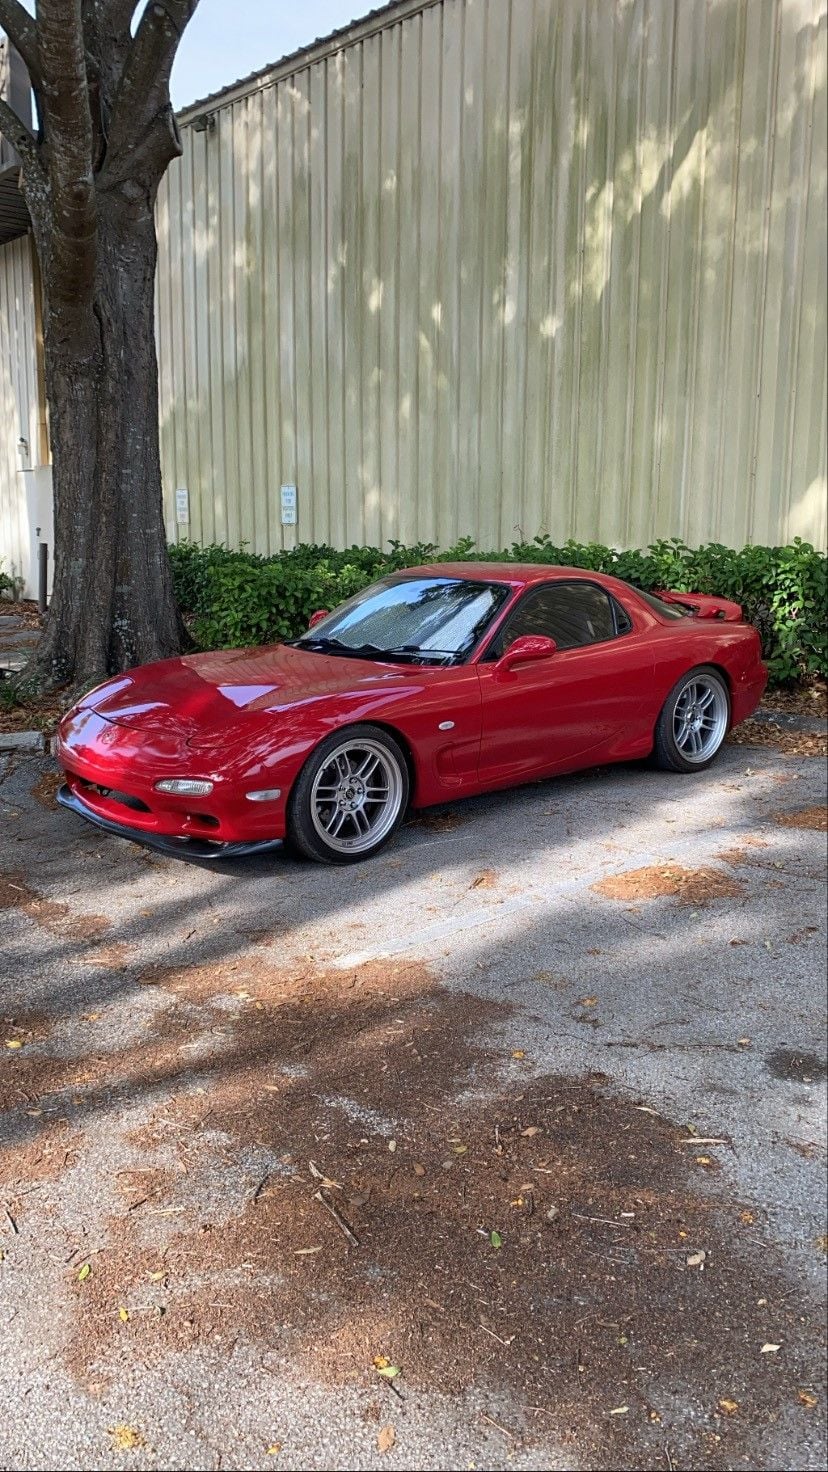 Exterior Body Parts - Spare Parts - Used - 1992 to 2002 Mazda RX-7 - Orlando, FL 32803, United States